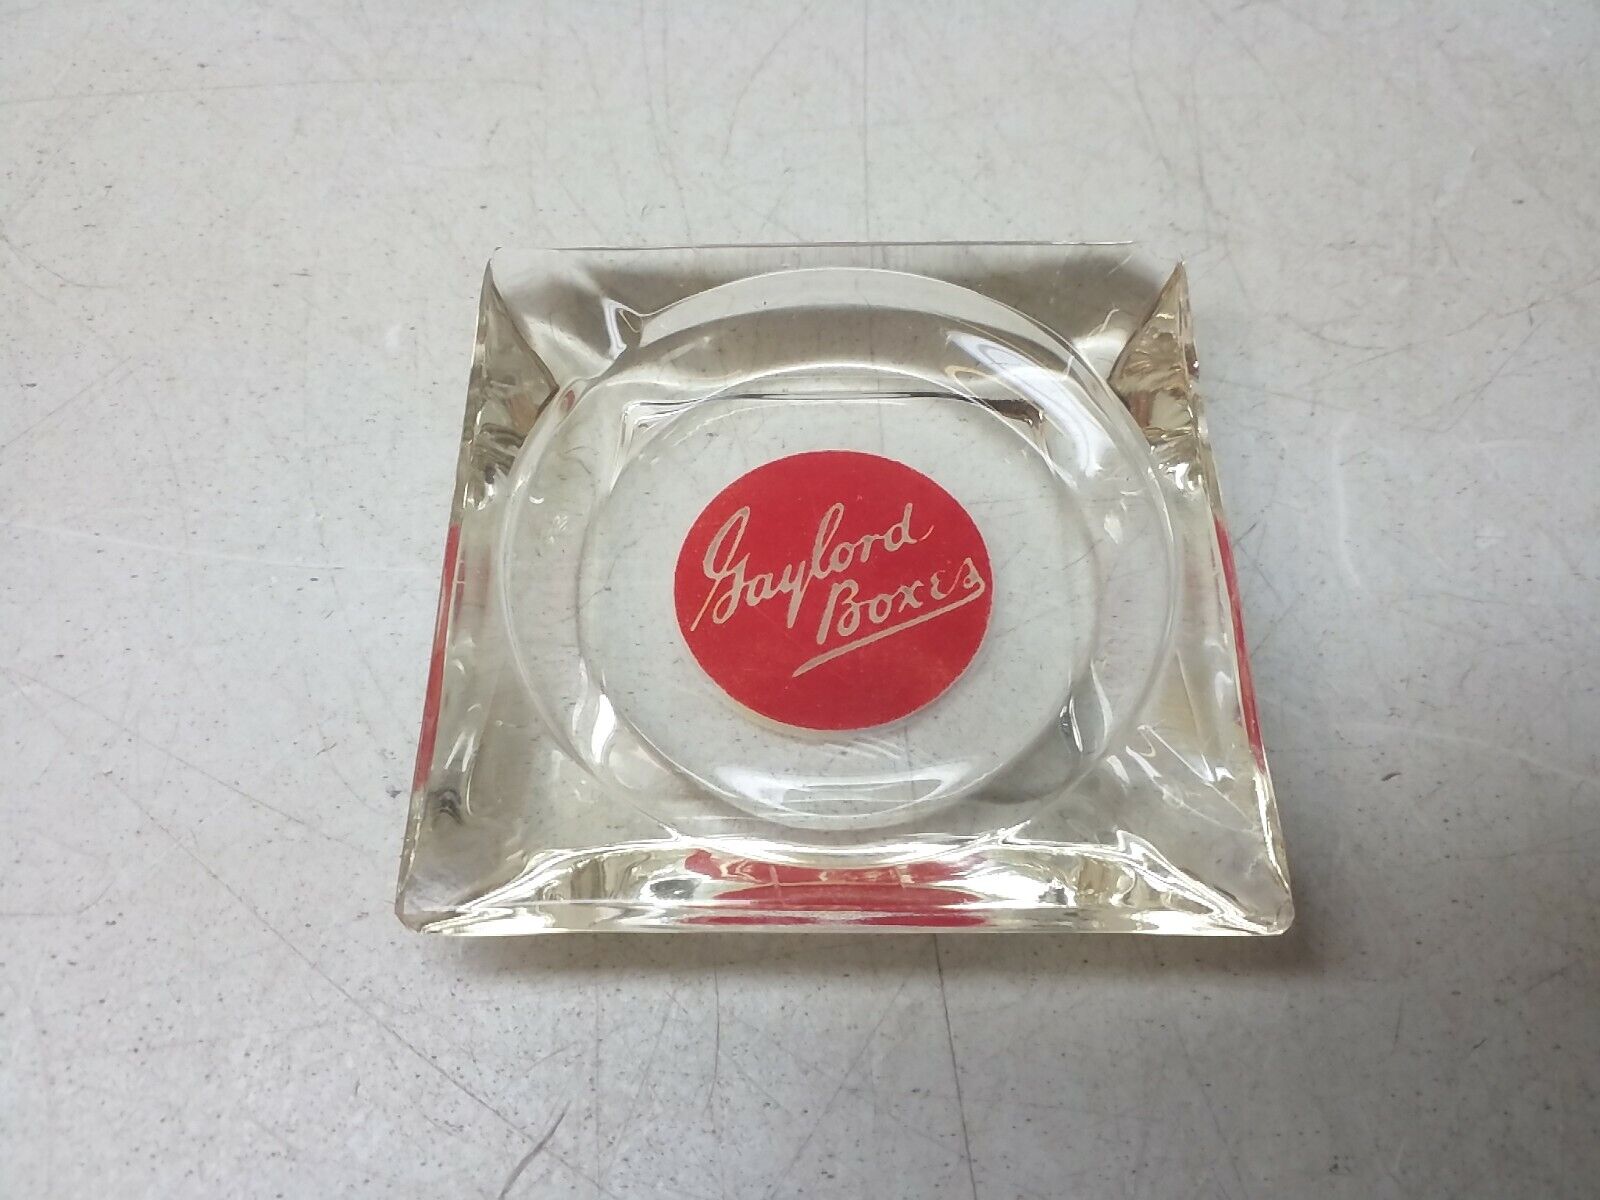 Gaylord Boxes Glass Ashtray Vintage Deerfield Illinois Company Advertising 